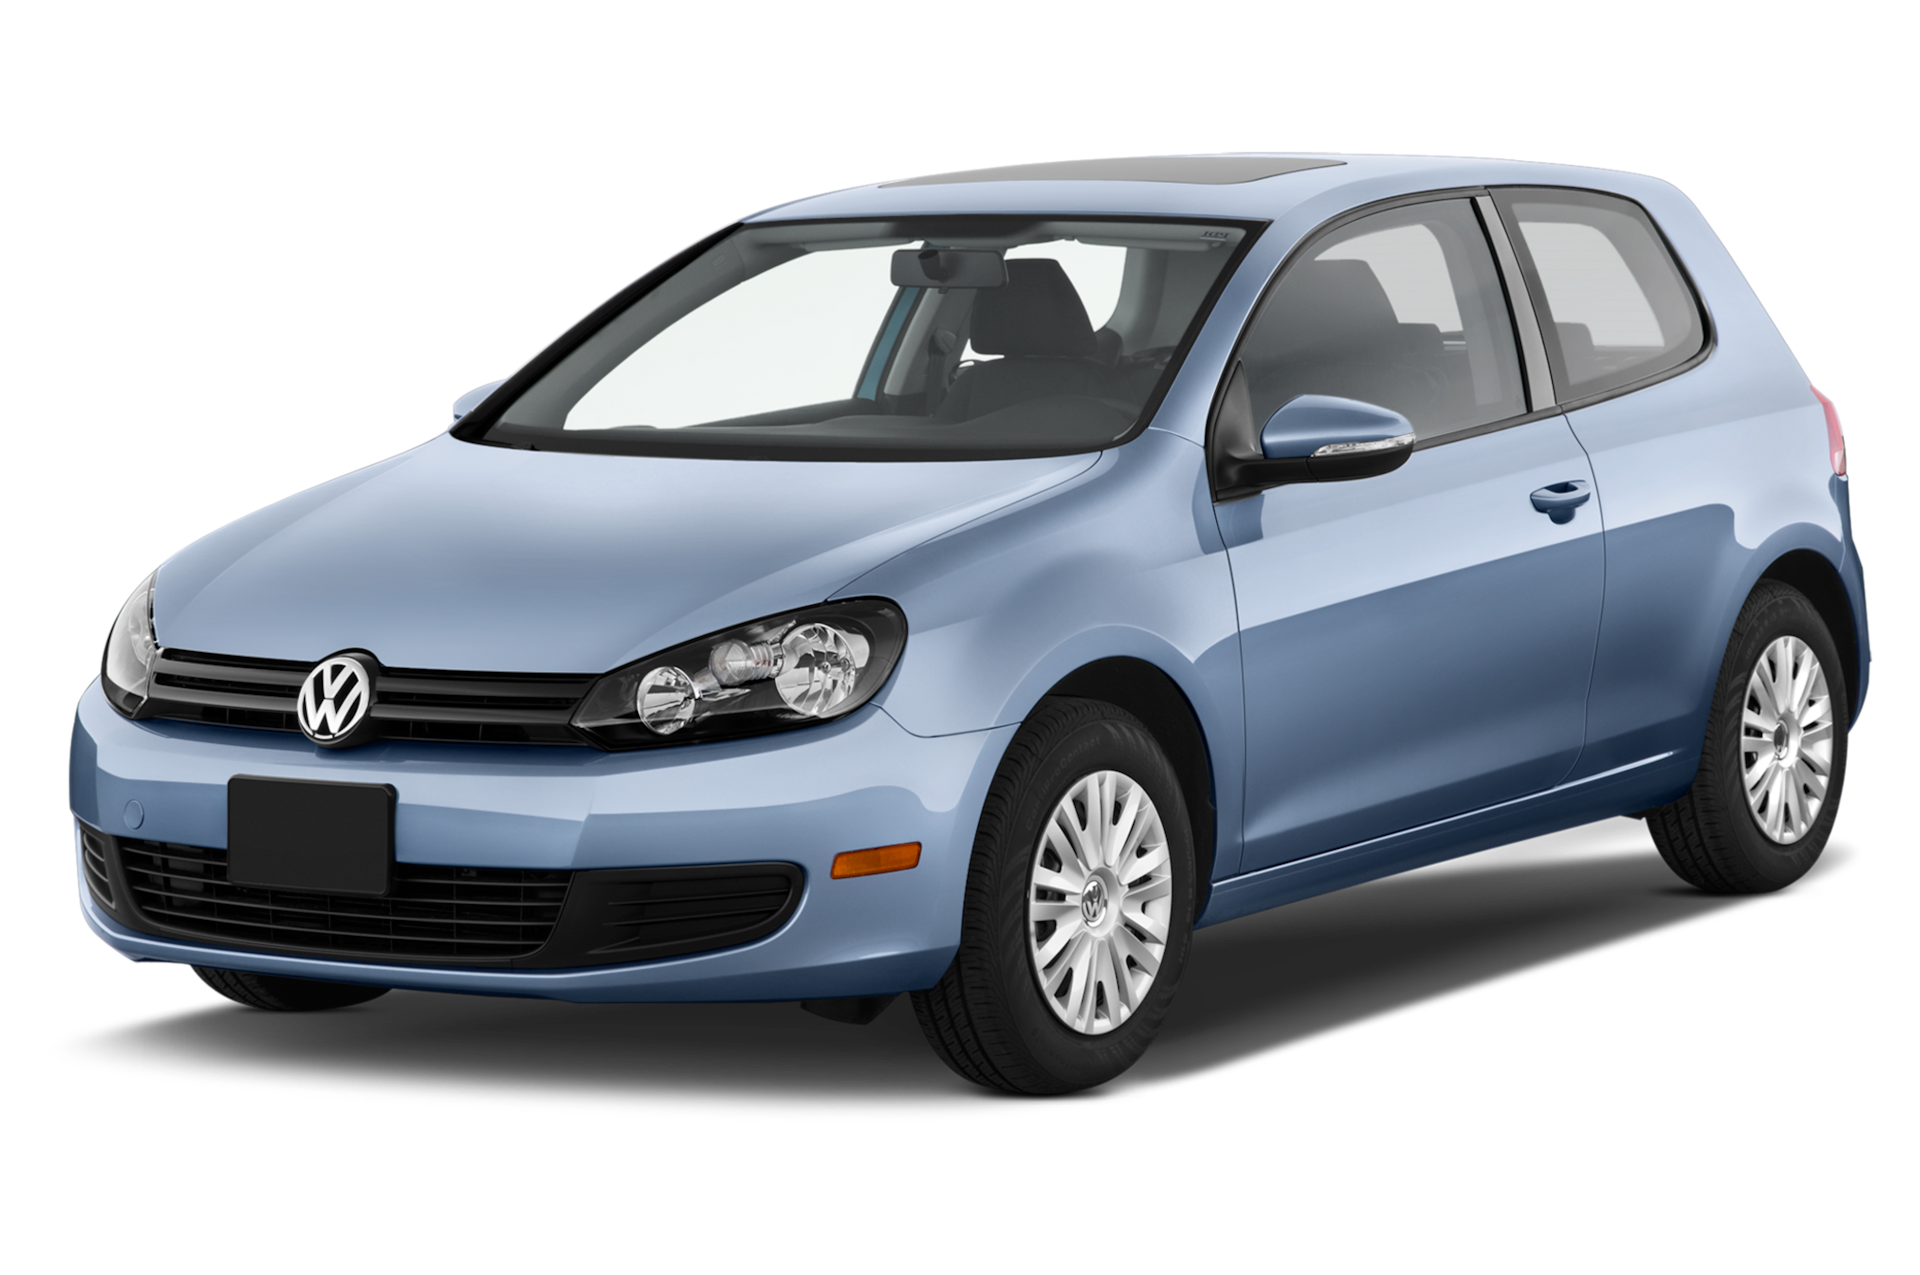 2010 Volkswagen Golf Prices, Reviews, and Photos - MotorTrend